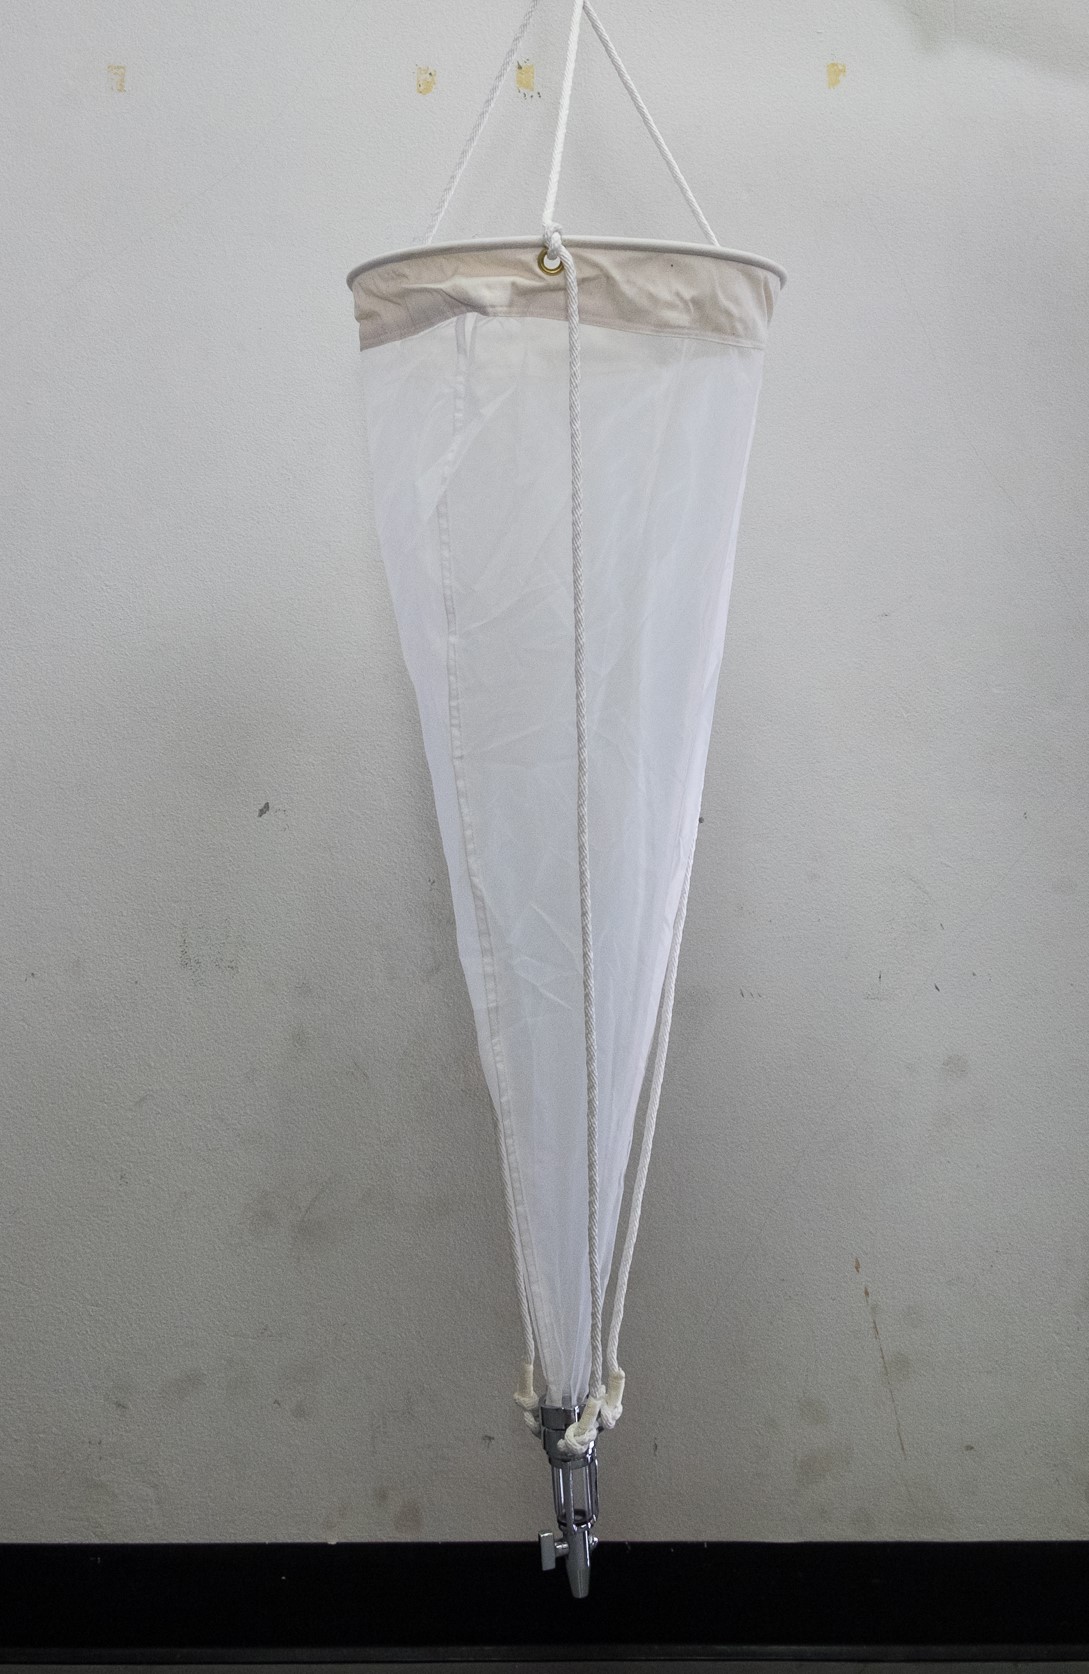 File:A simple plankton net with 20 microns mesh size.jpg - Wikimedia Commons